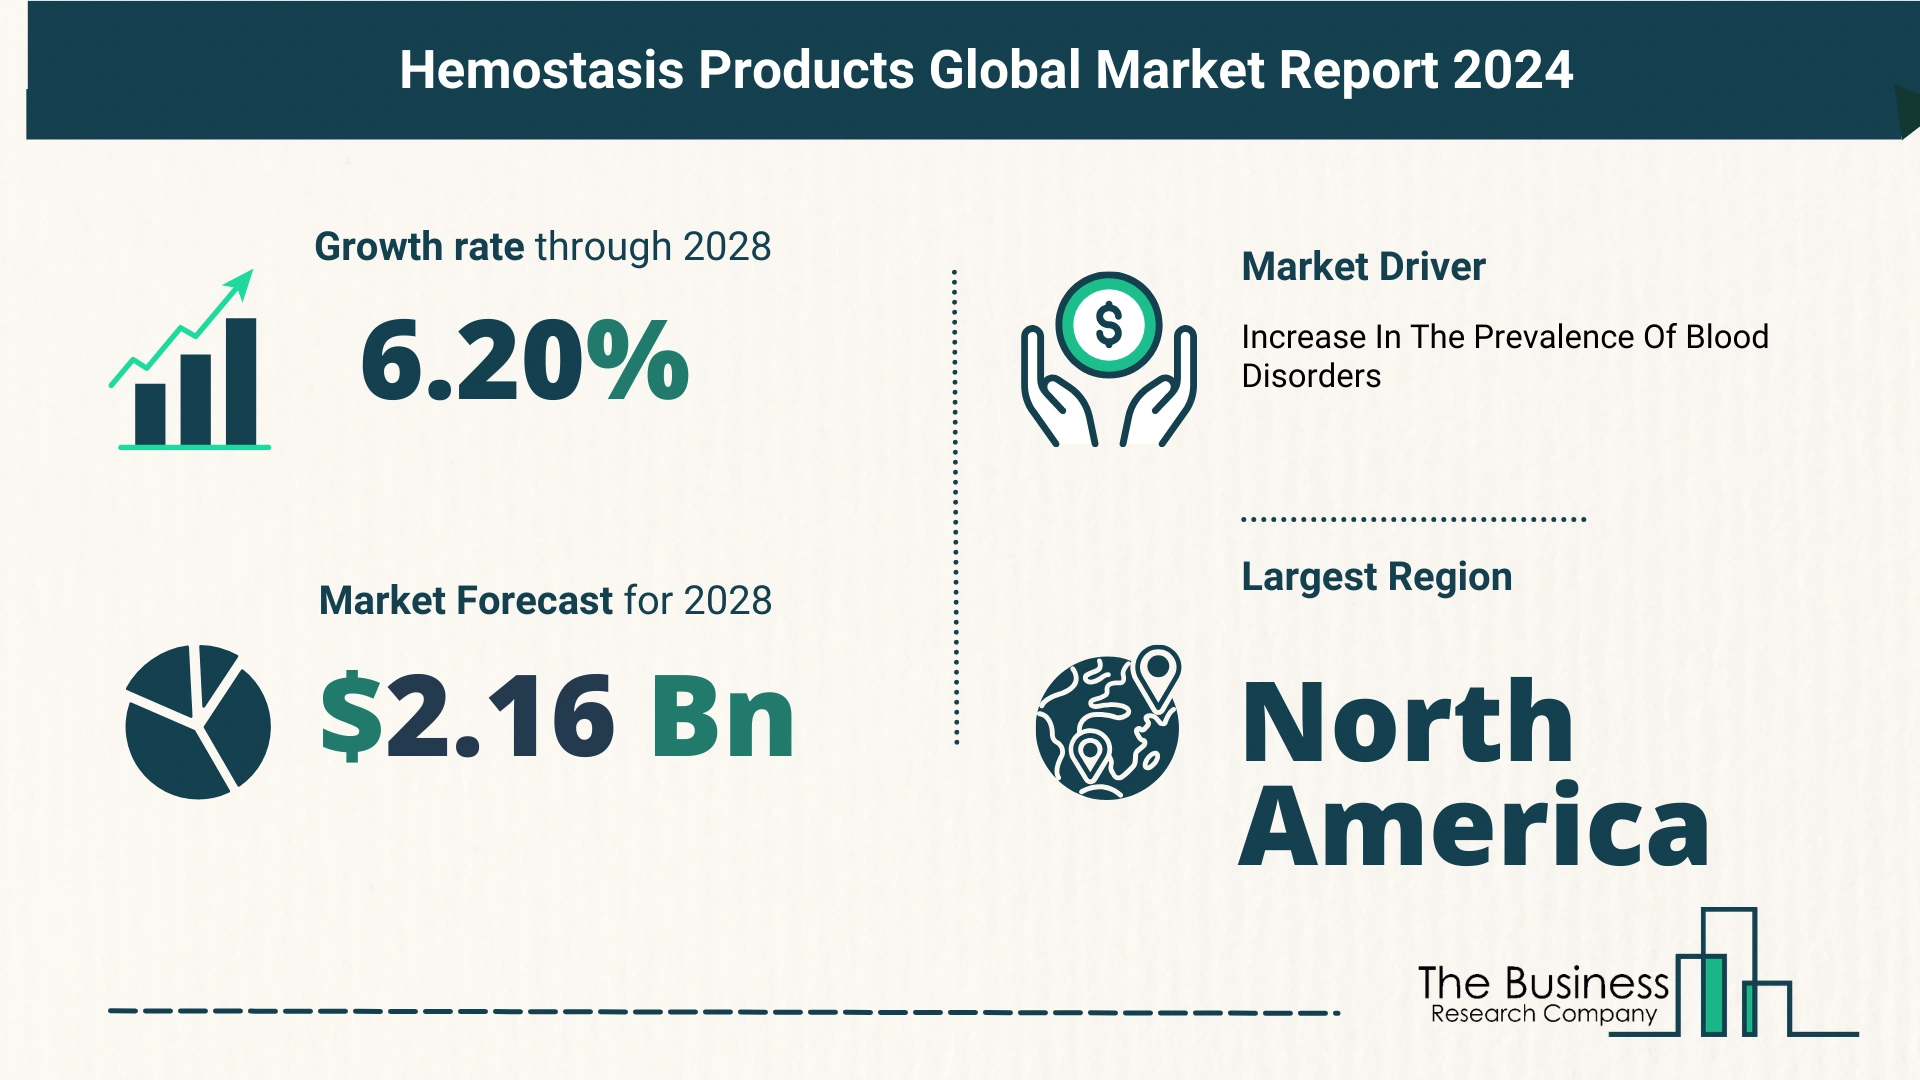 Key Takeaways From The Global Hemostasis Products Market Forecast 2024